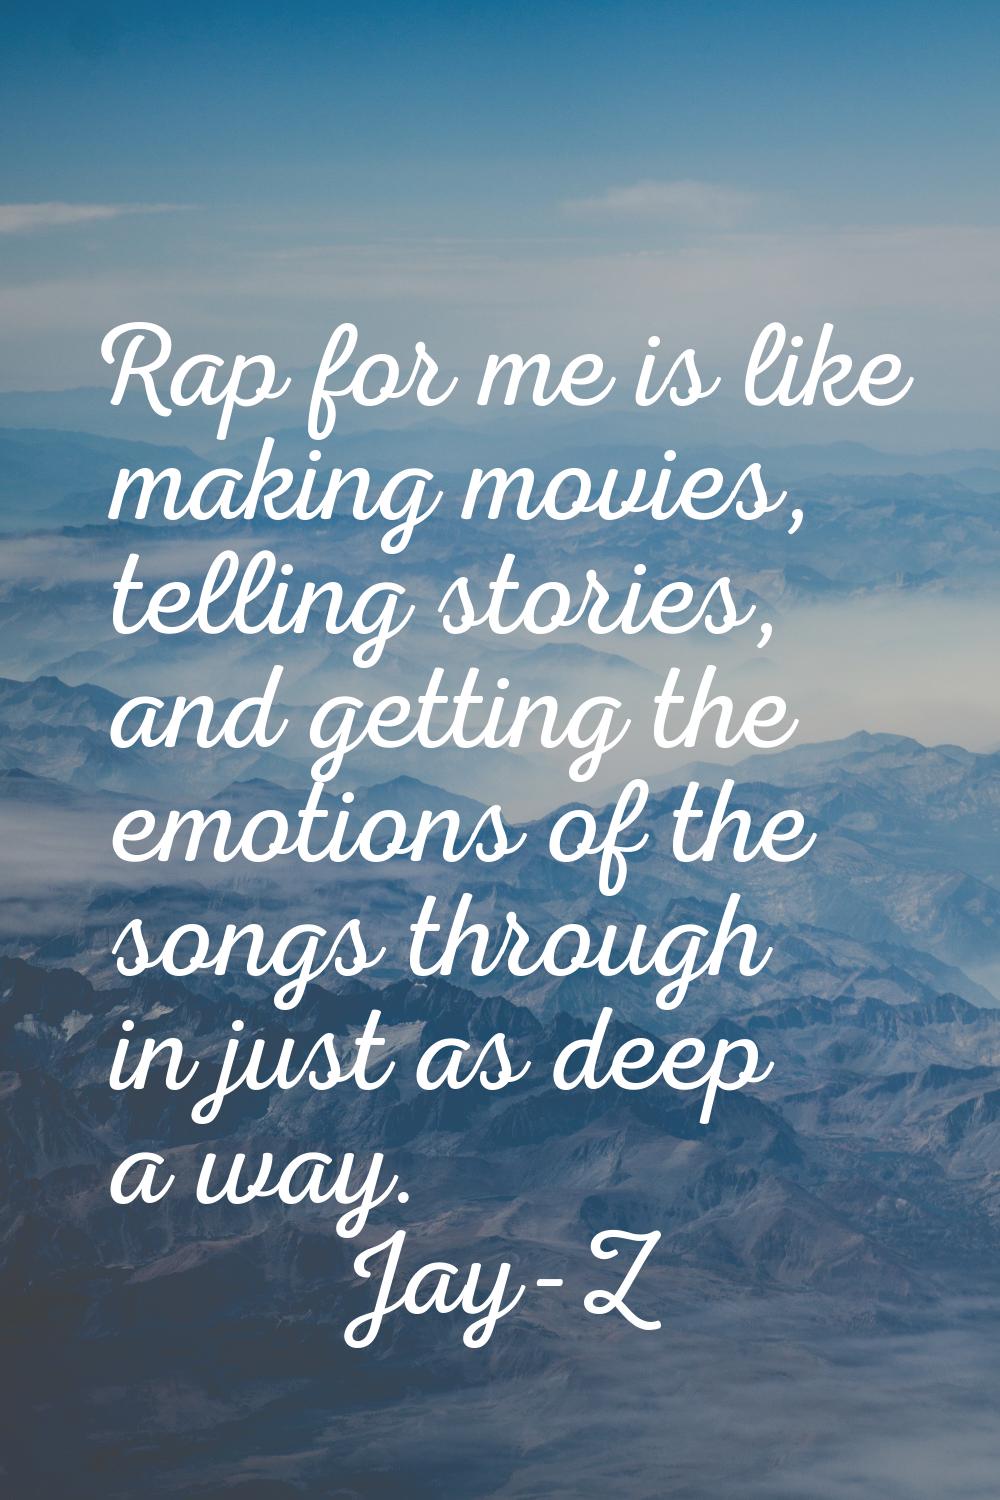 Rap for me is like making movies, telling stories, and getting the emotions of the songs through in